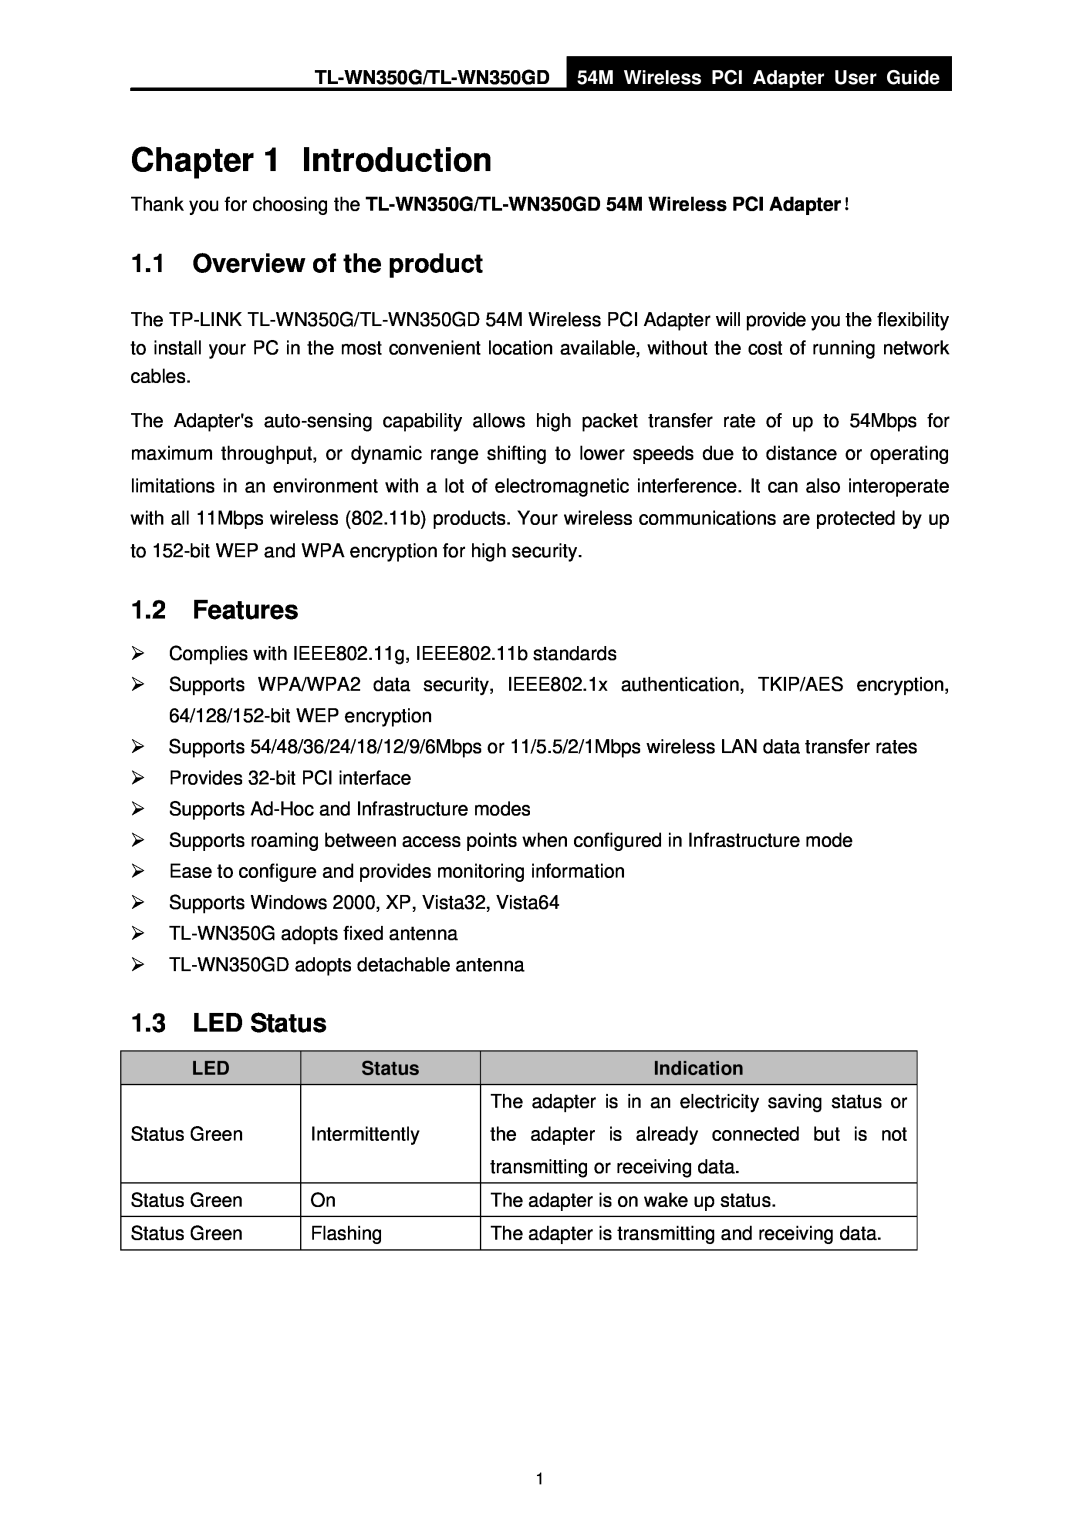 TP-Link manual Introduction, Overview of the product, Features, LED Status, Indication, TL-WN350G/TL-WN350GD 